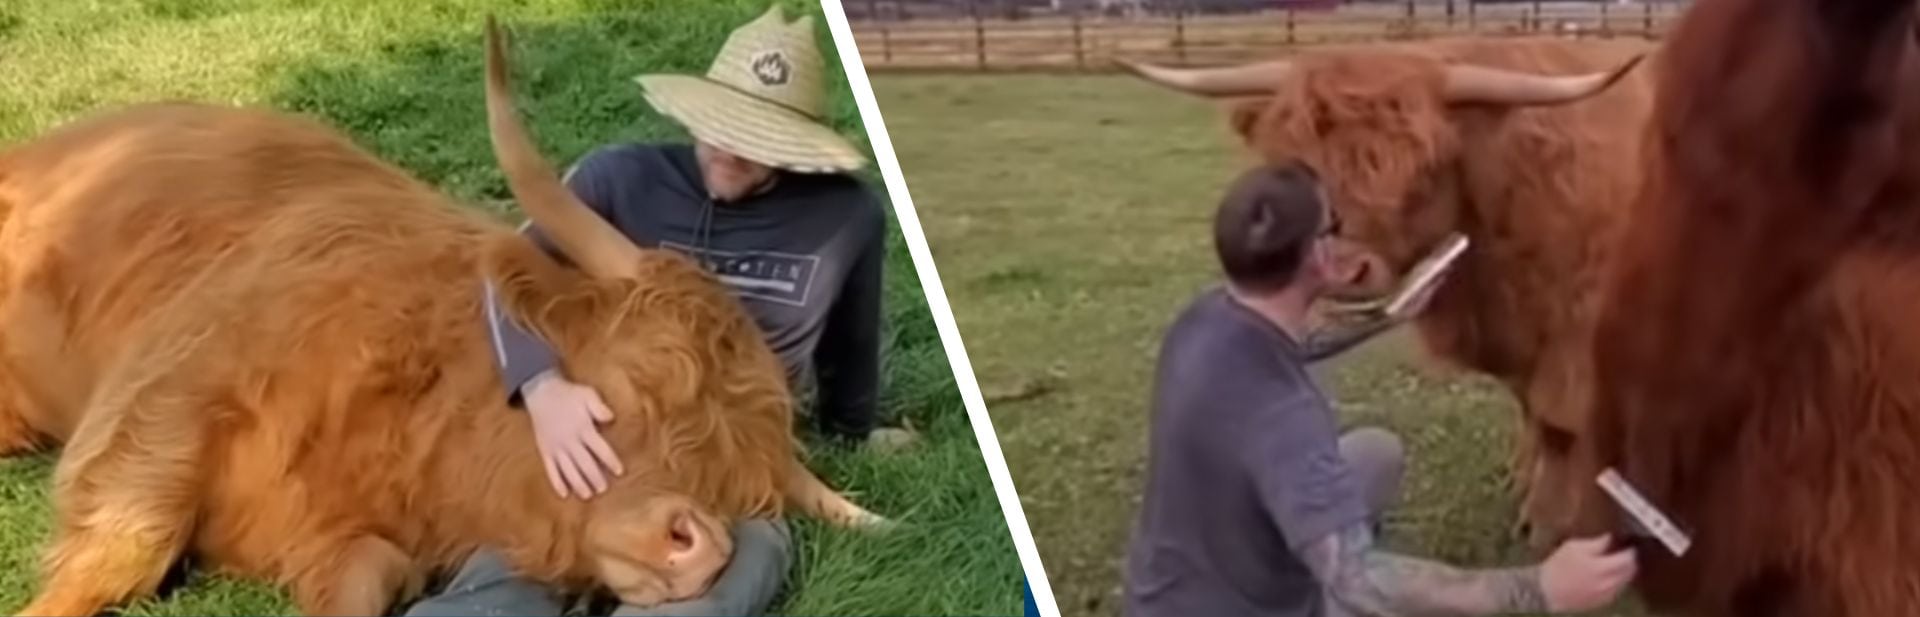 Gentle Highland Cow Brings A Special Type of Affection To Idaho Homestead